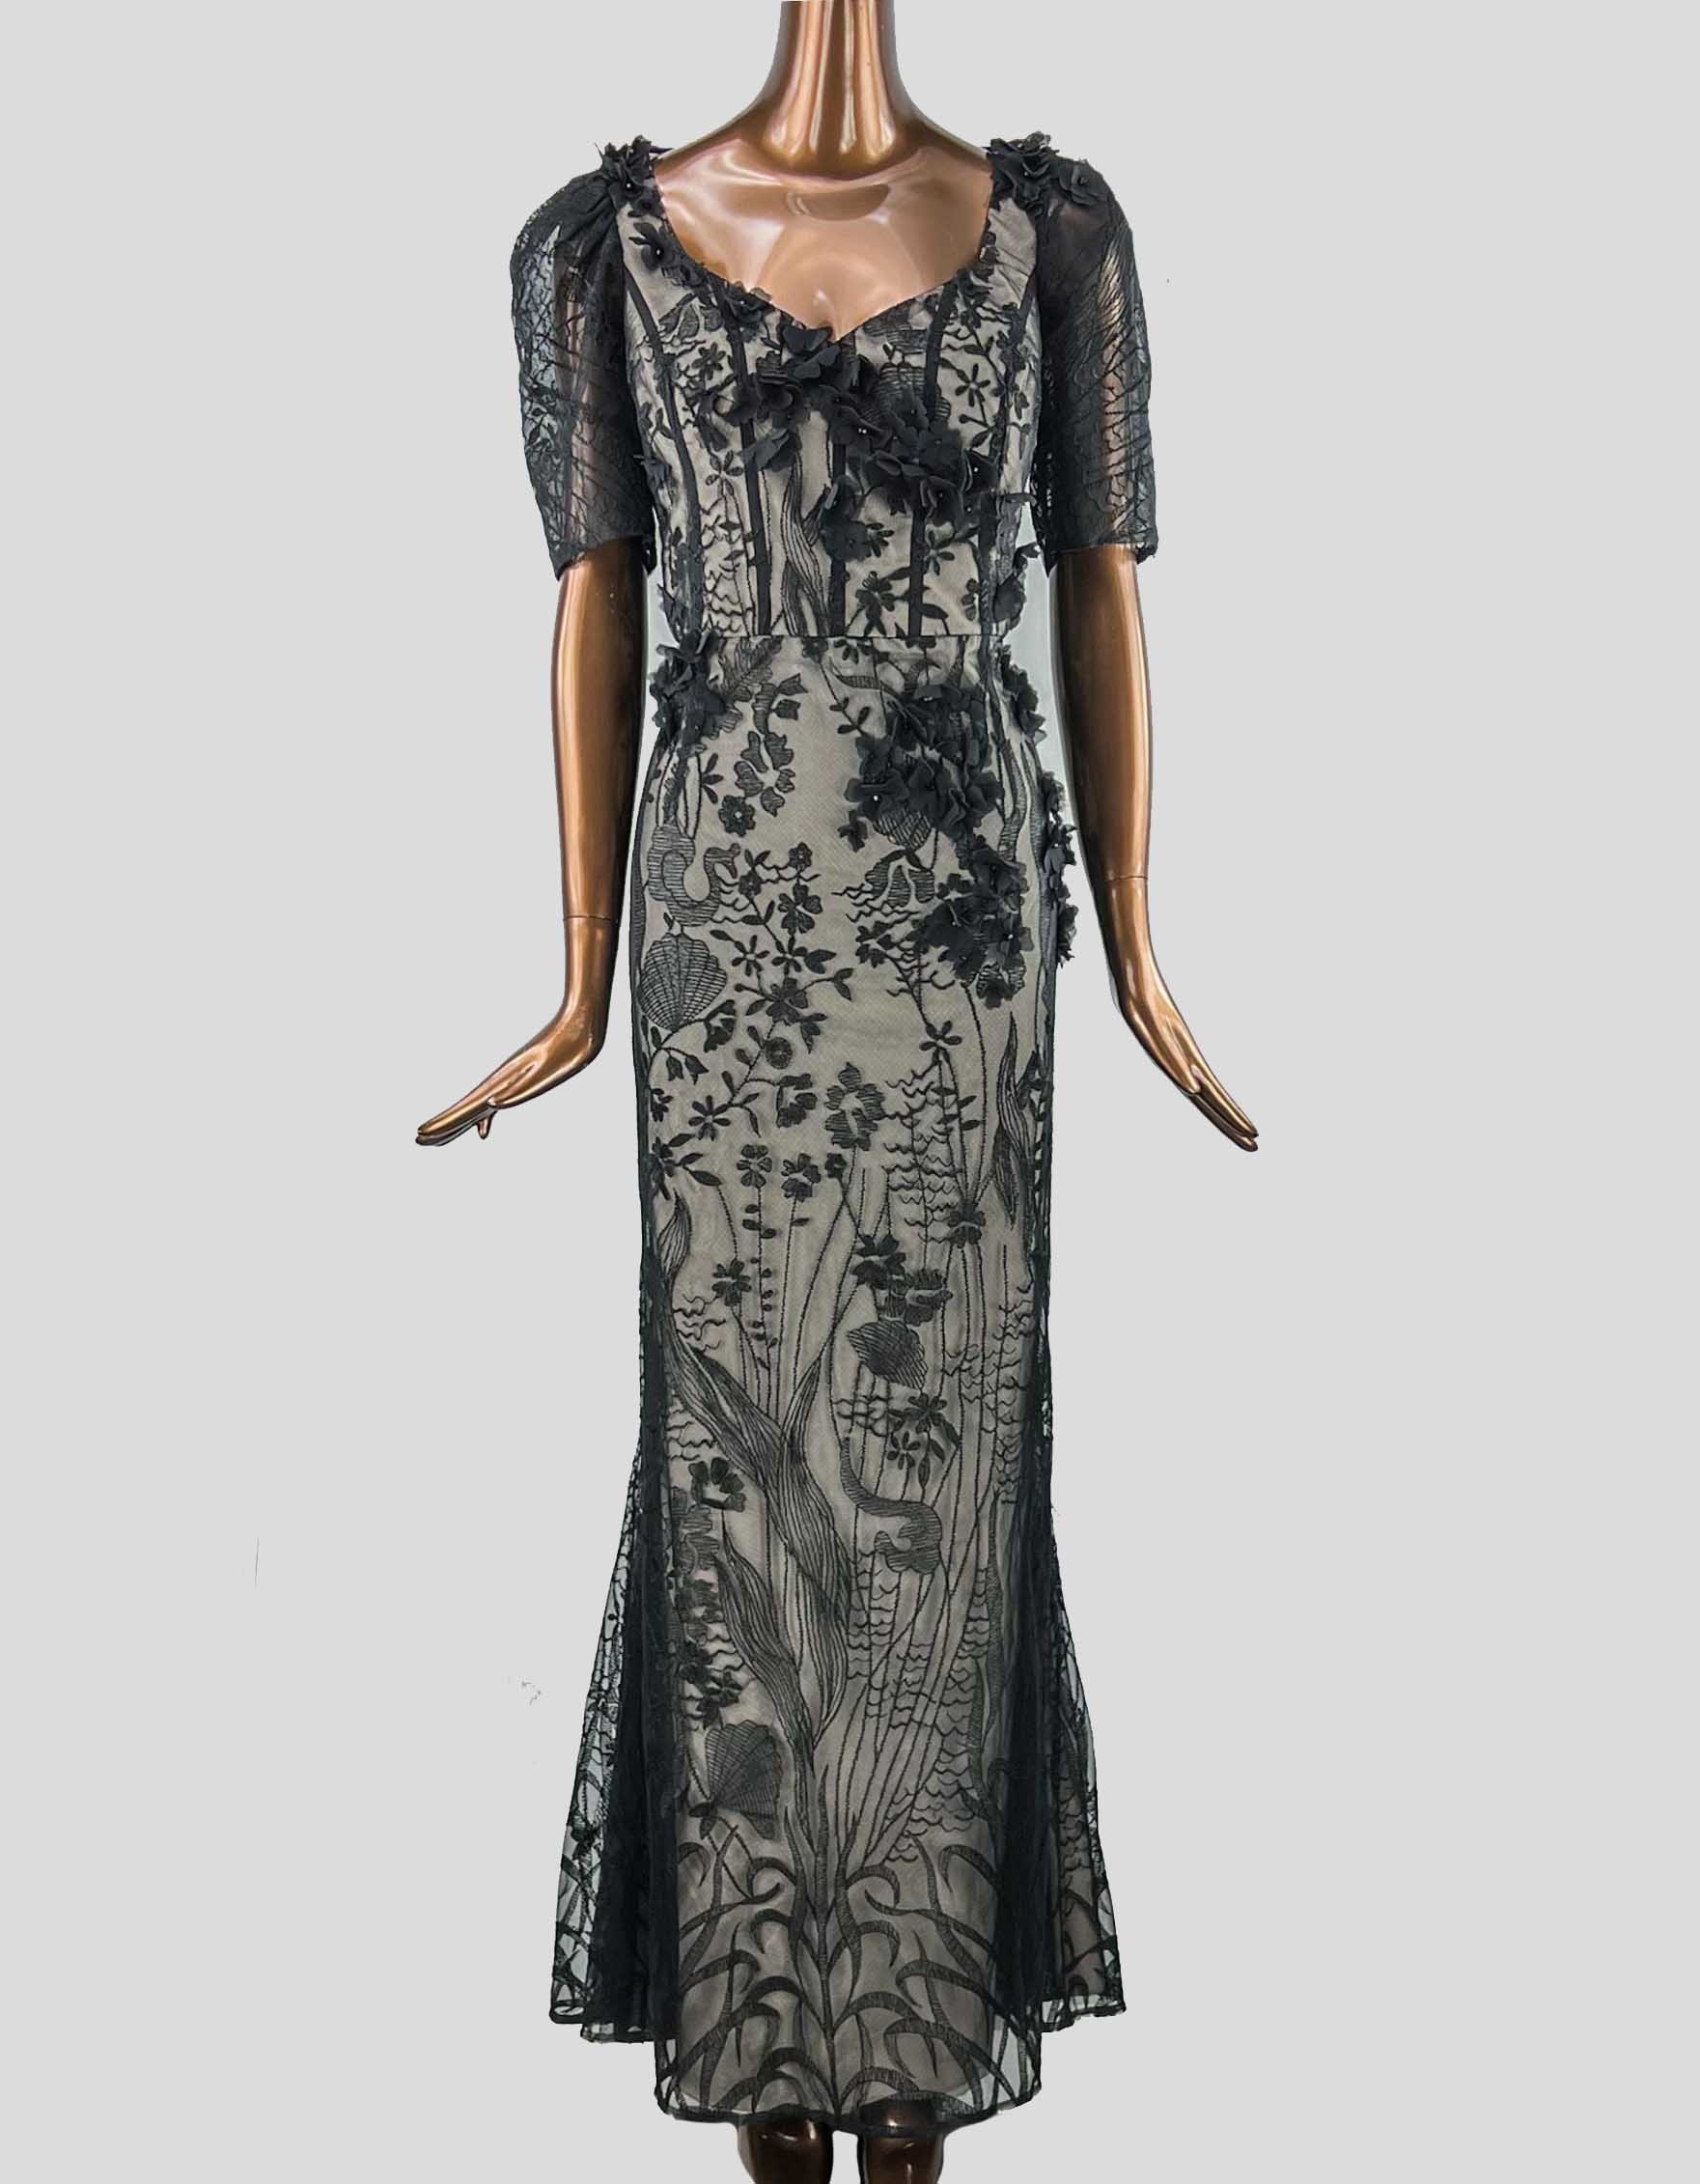  TERI JON BY RICKIE FREEMAN floral lace evening gown in black with nude tone underlay.